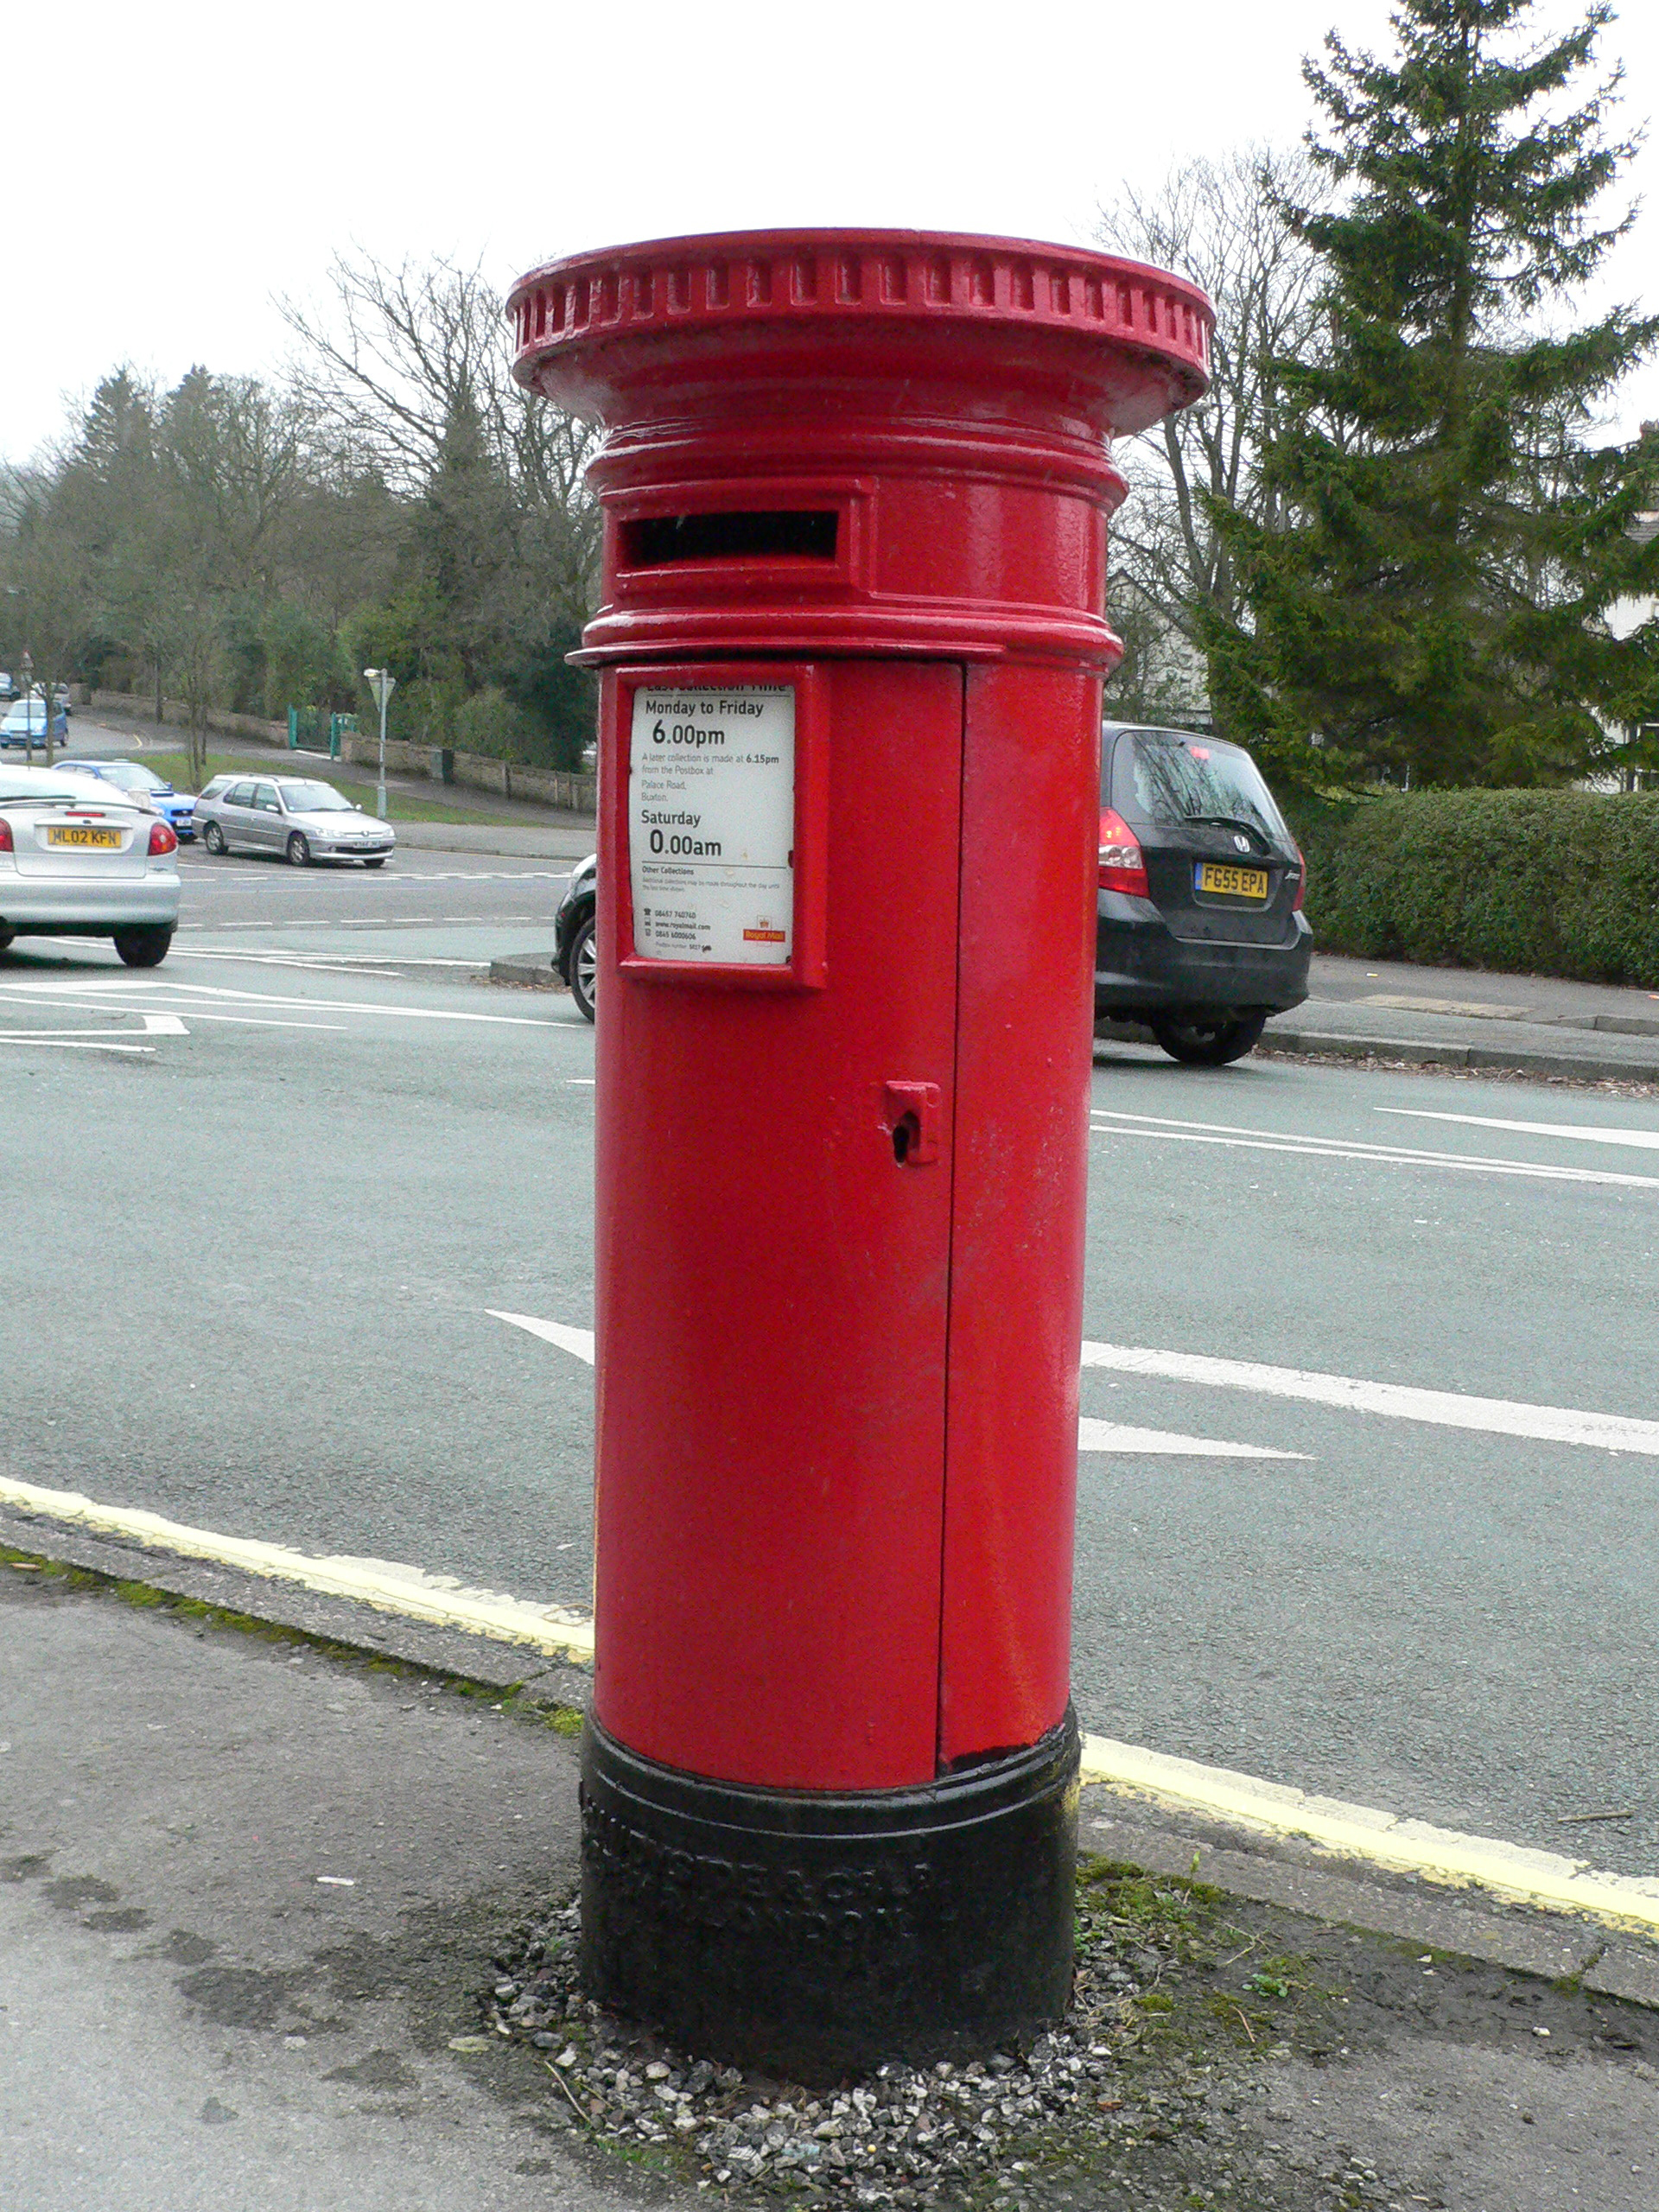 The Red Post Box: A Royal British Icon | The Lady in Waiting